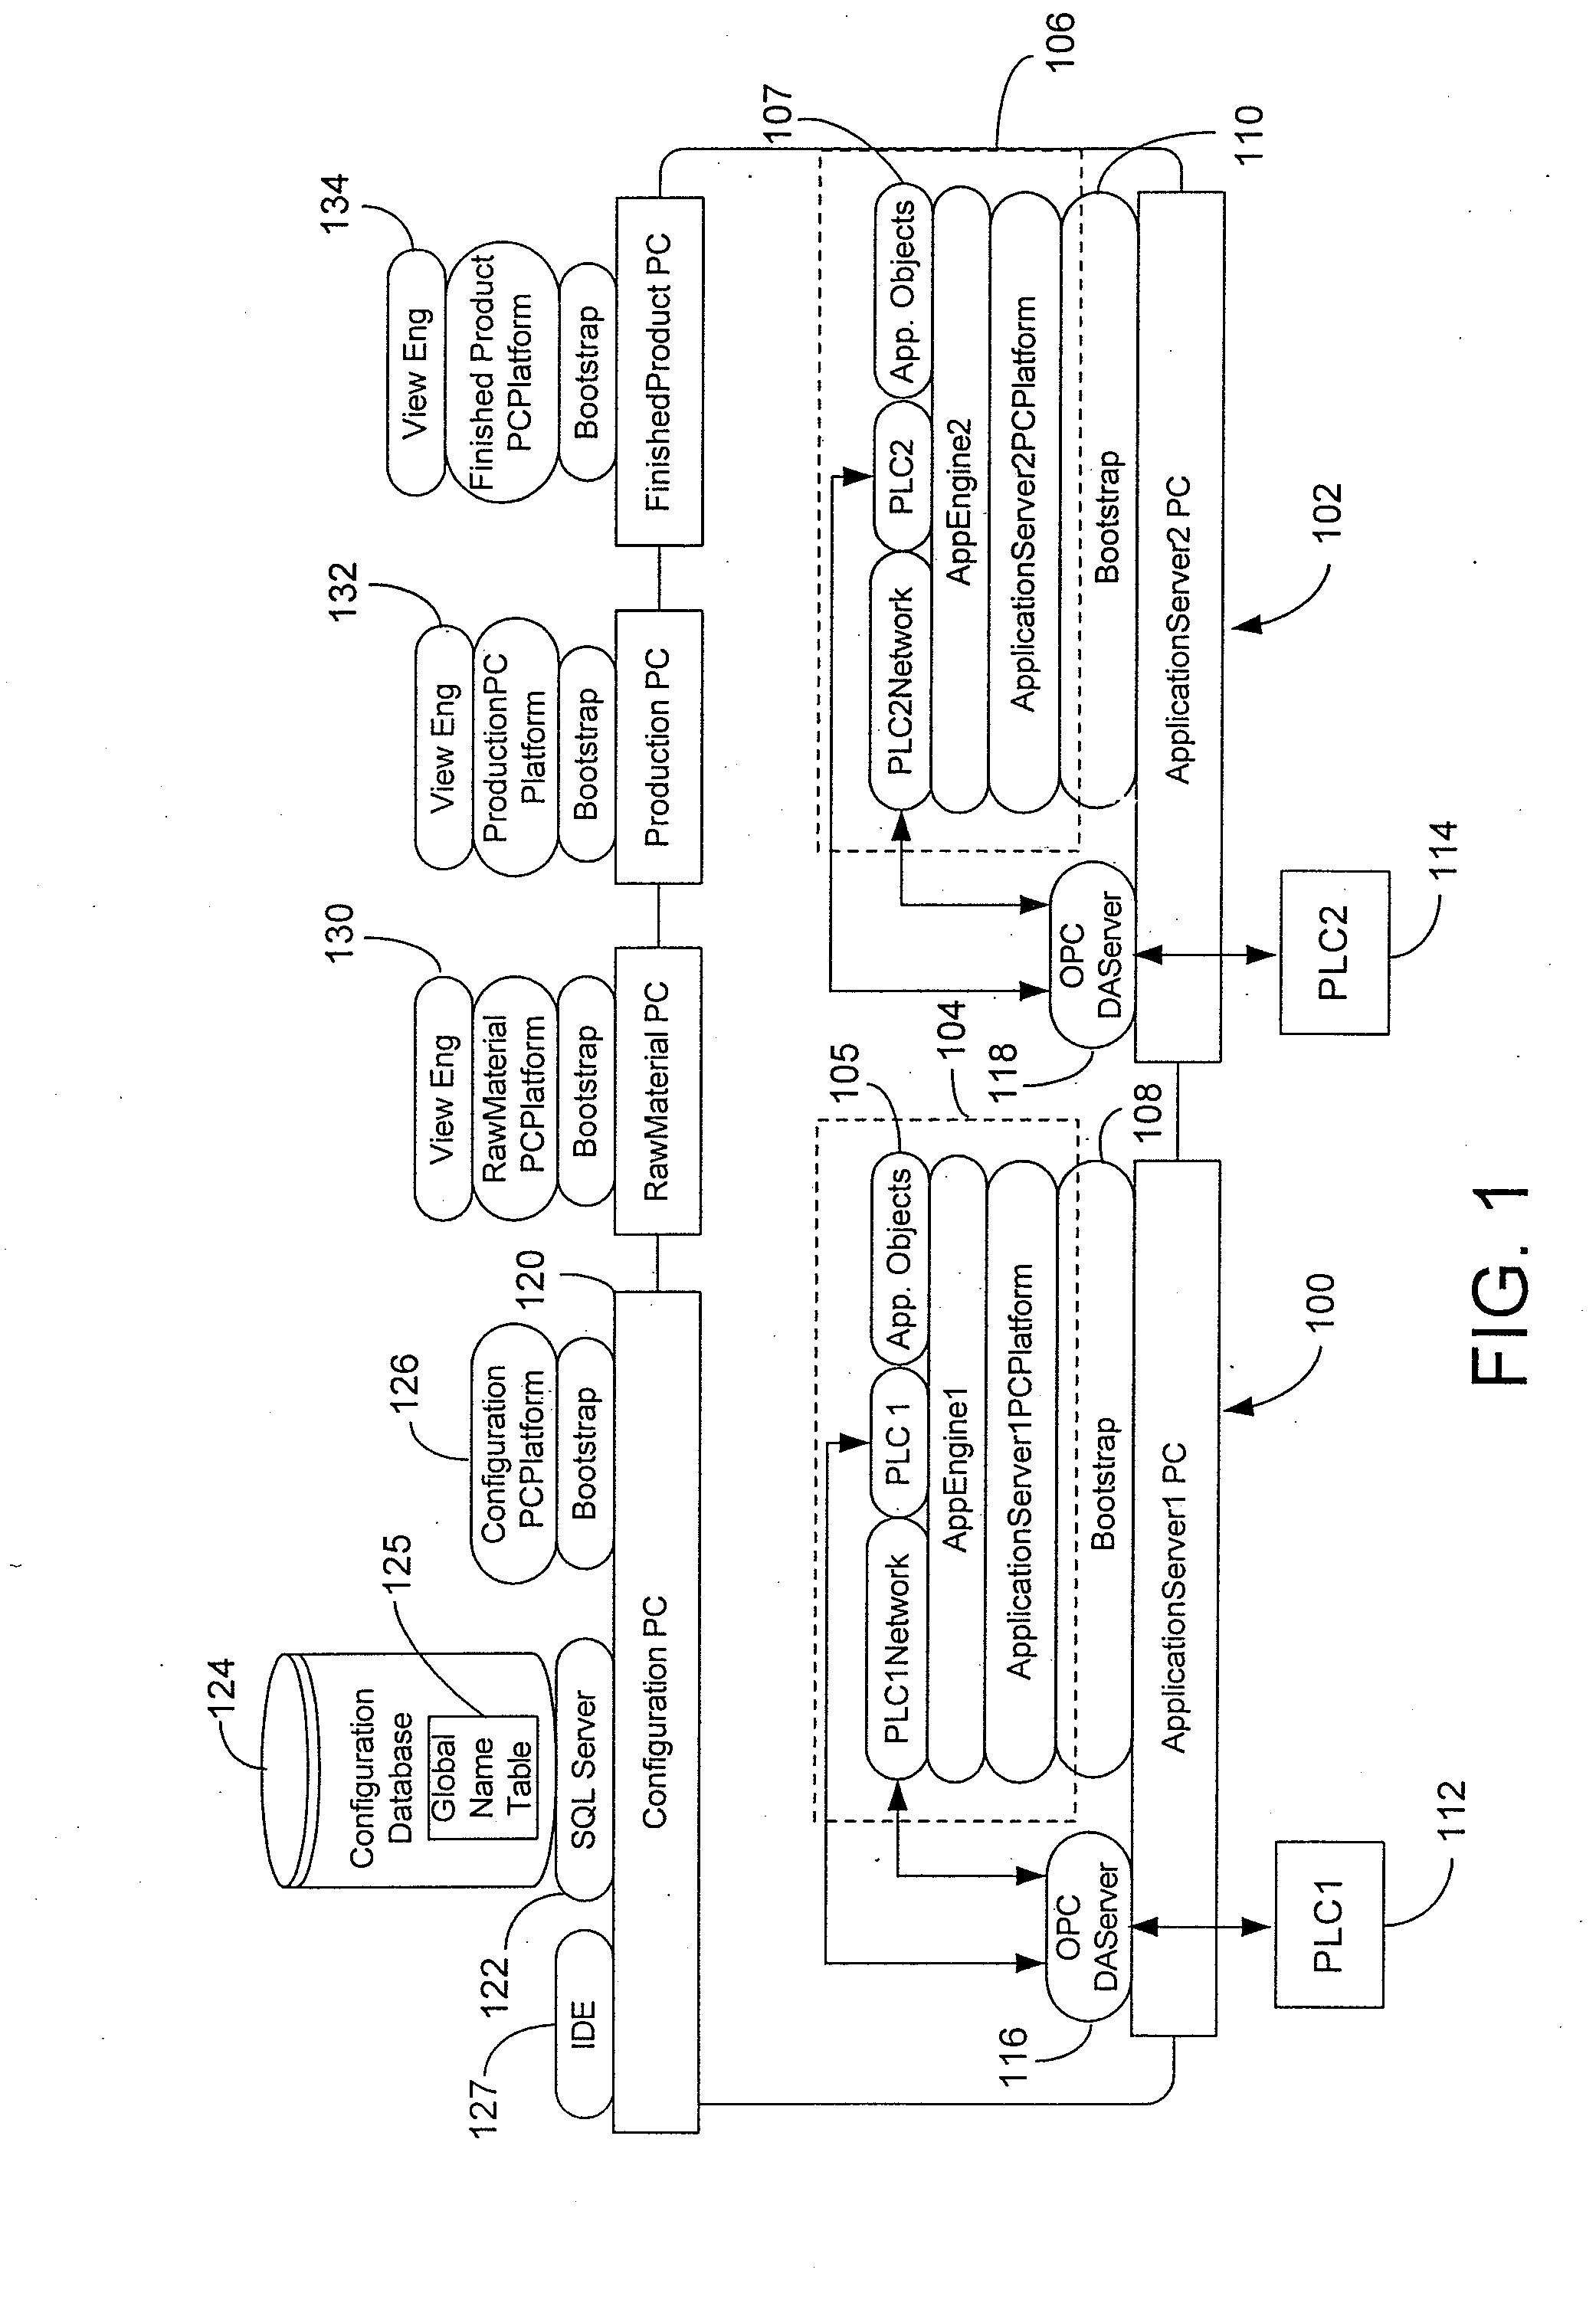 Supervisory Process Control And Manufacturing Information System Application Having An Extensible Component Model